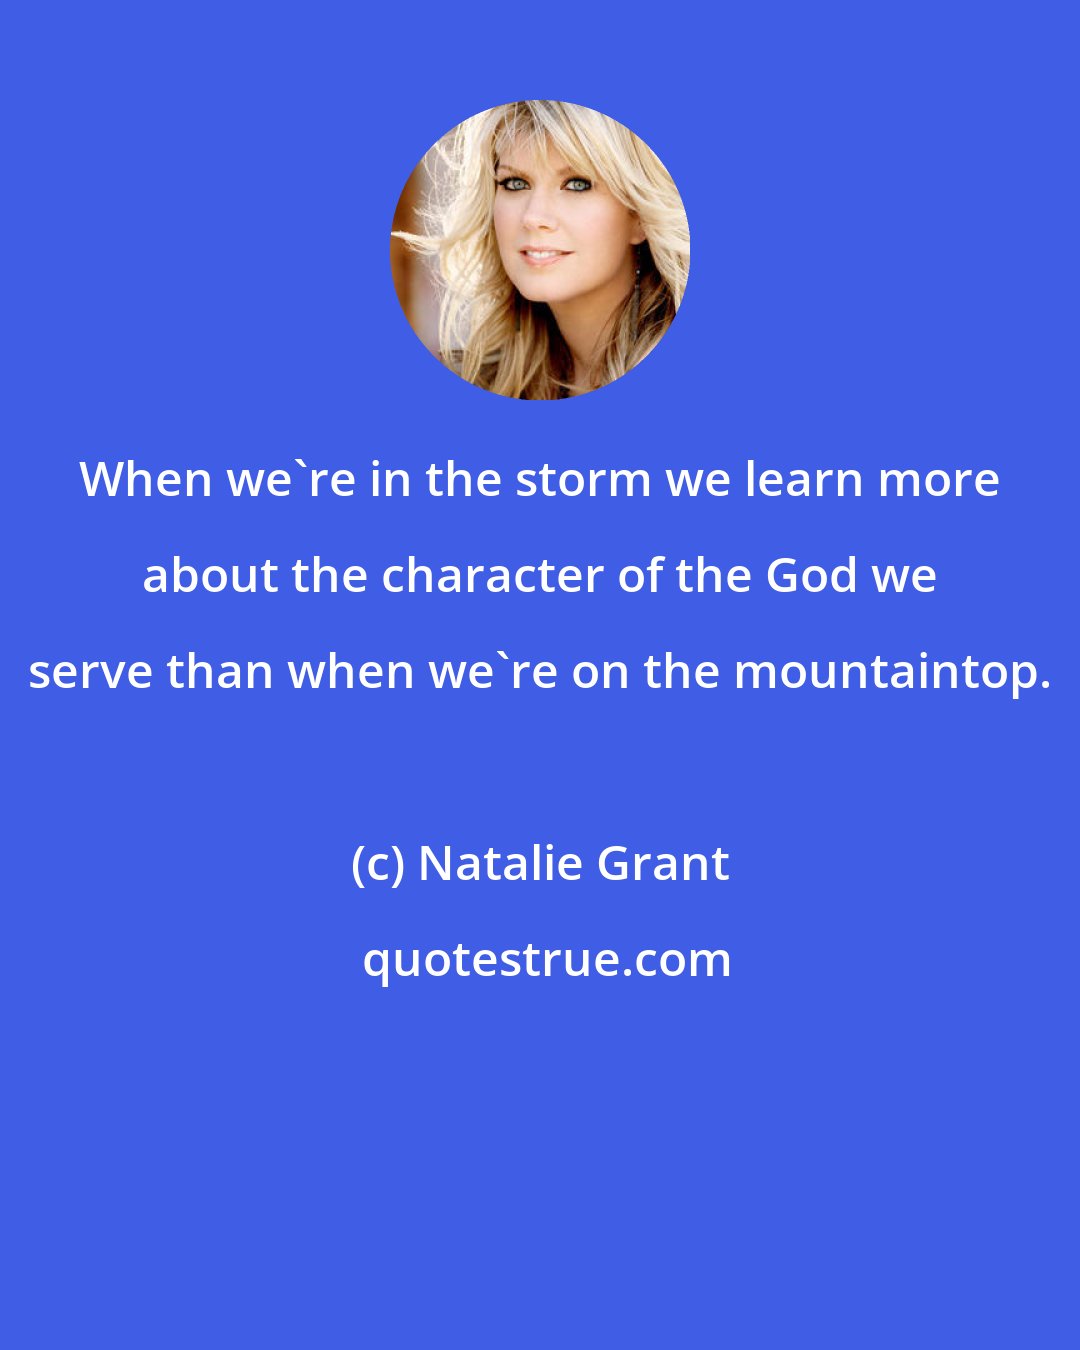 Natalie Grant: When we're in the storm we learn more about the character of the God we serve than when we're on the mountaintop.